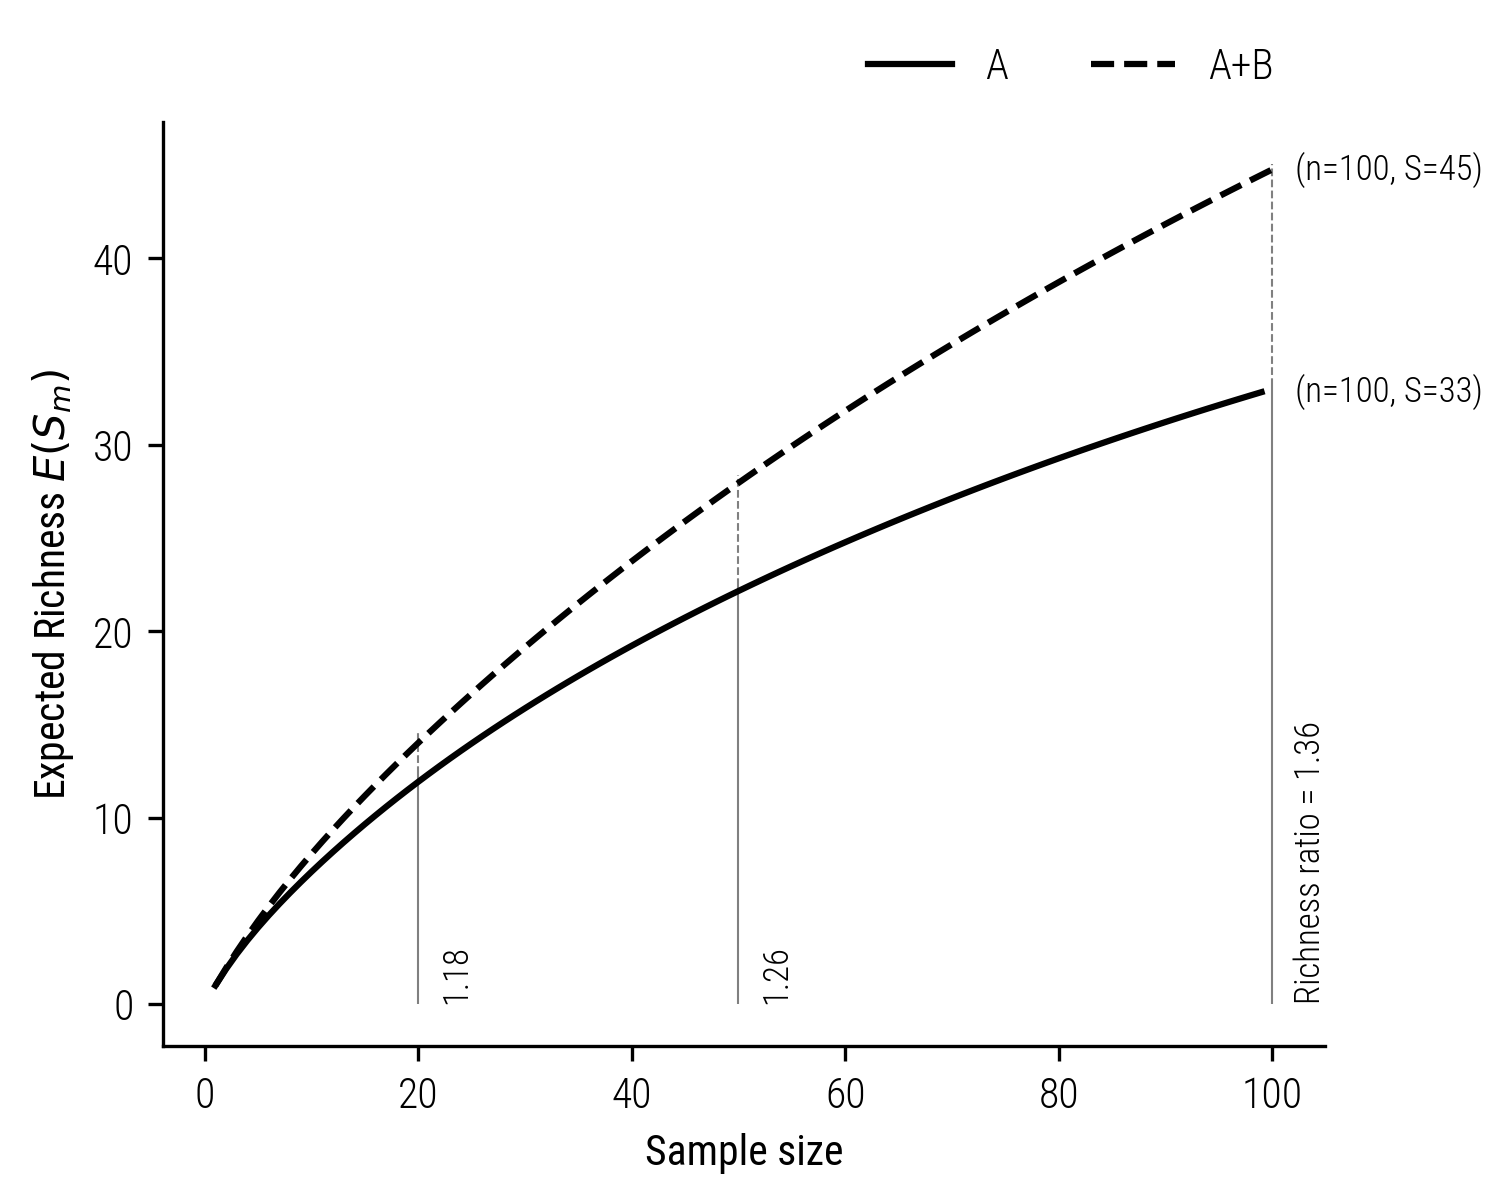 Figure 5: Rarefaction curve illustrating the absence of the doubling property when estimating richnesses based on samples of fixed size (based on Chao and Jost 2012)